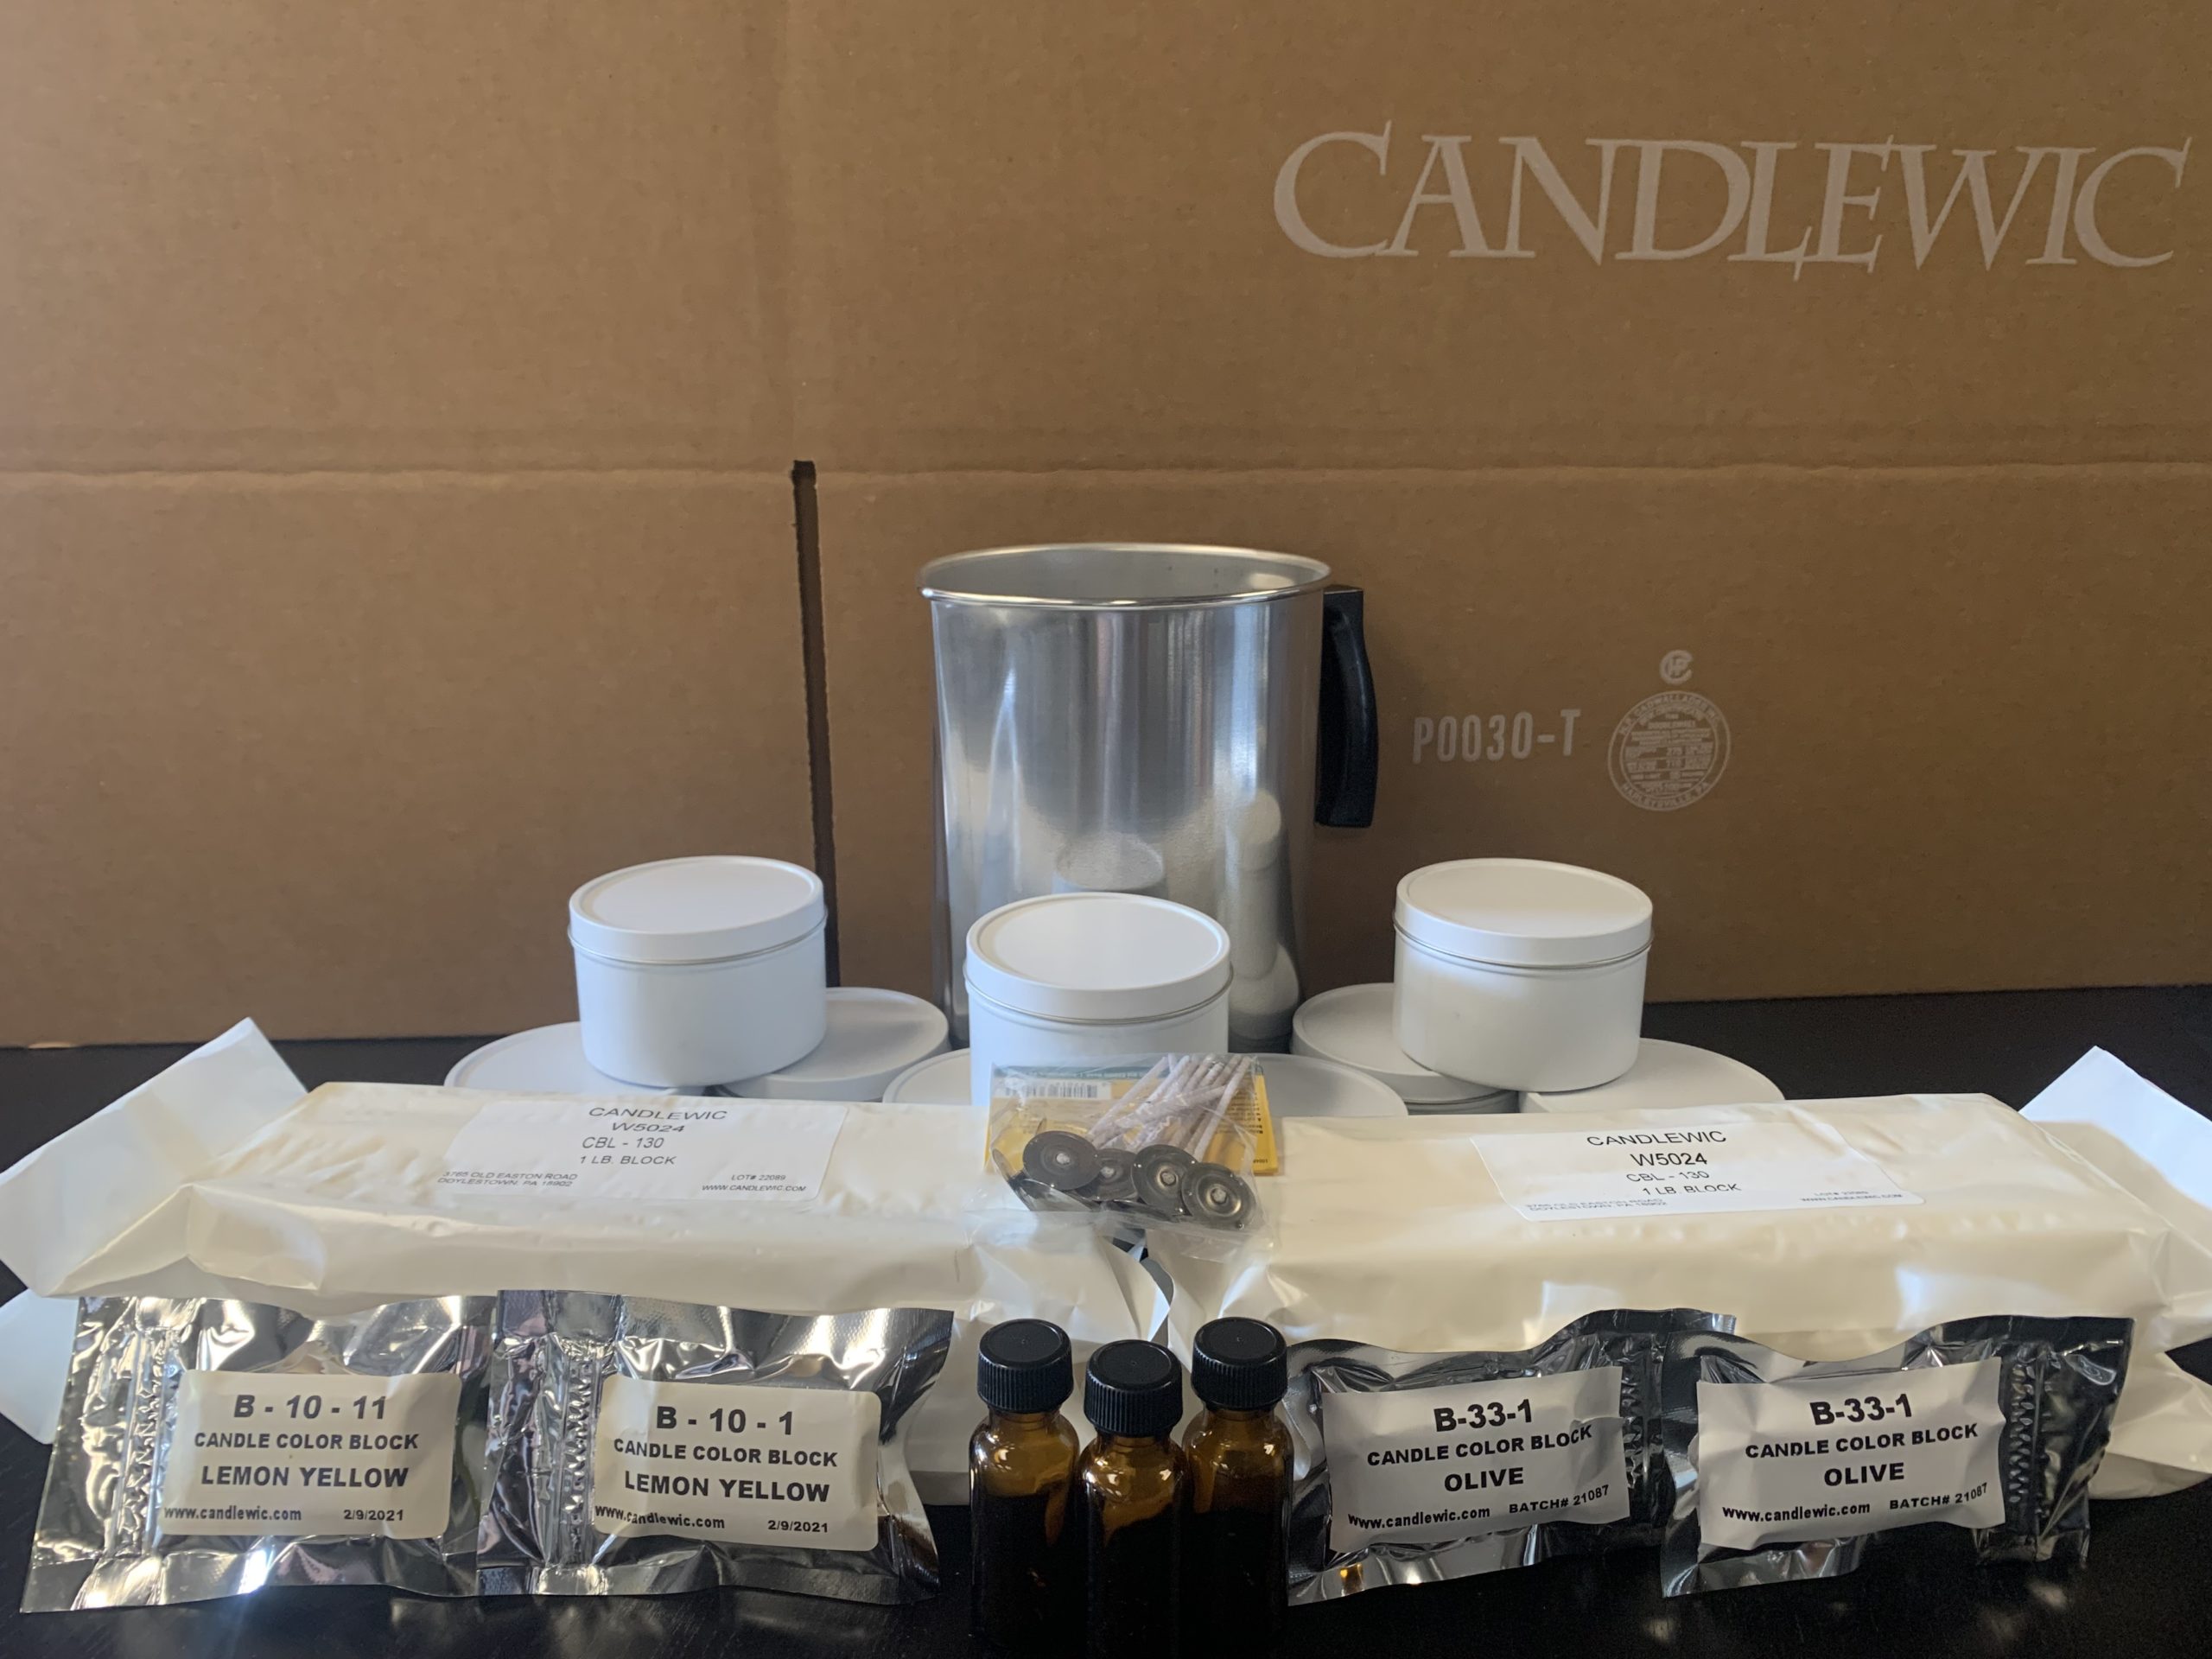 Paraffin Wax – Candlewic: Candle Making Supplies Since 1972